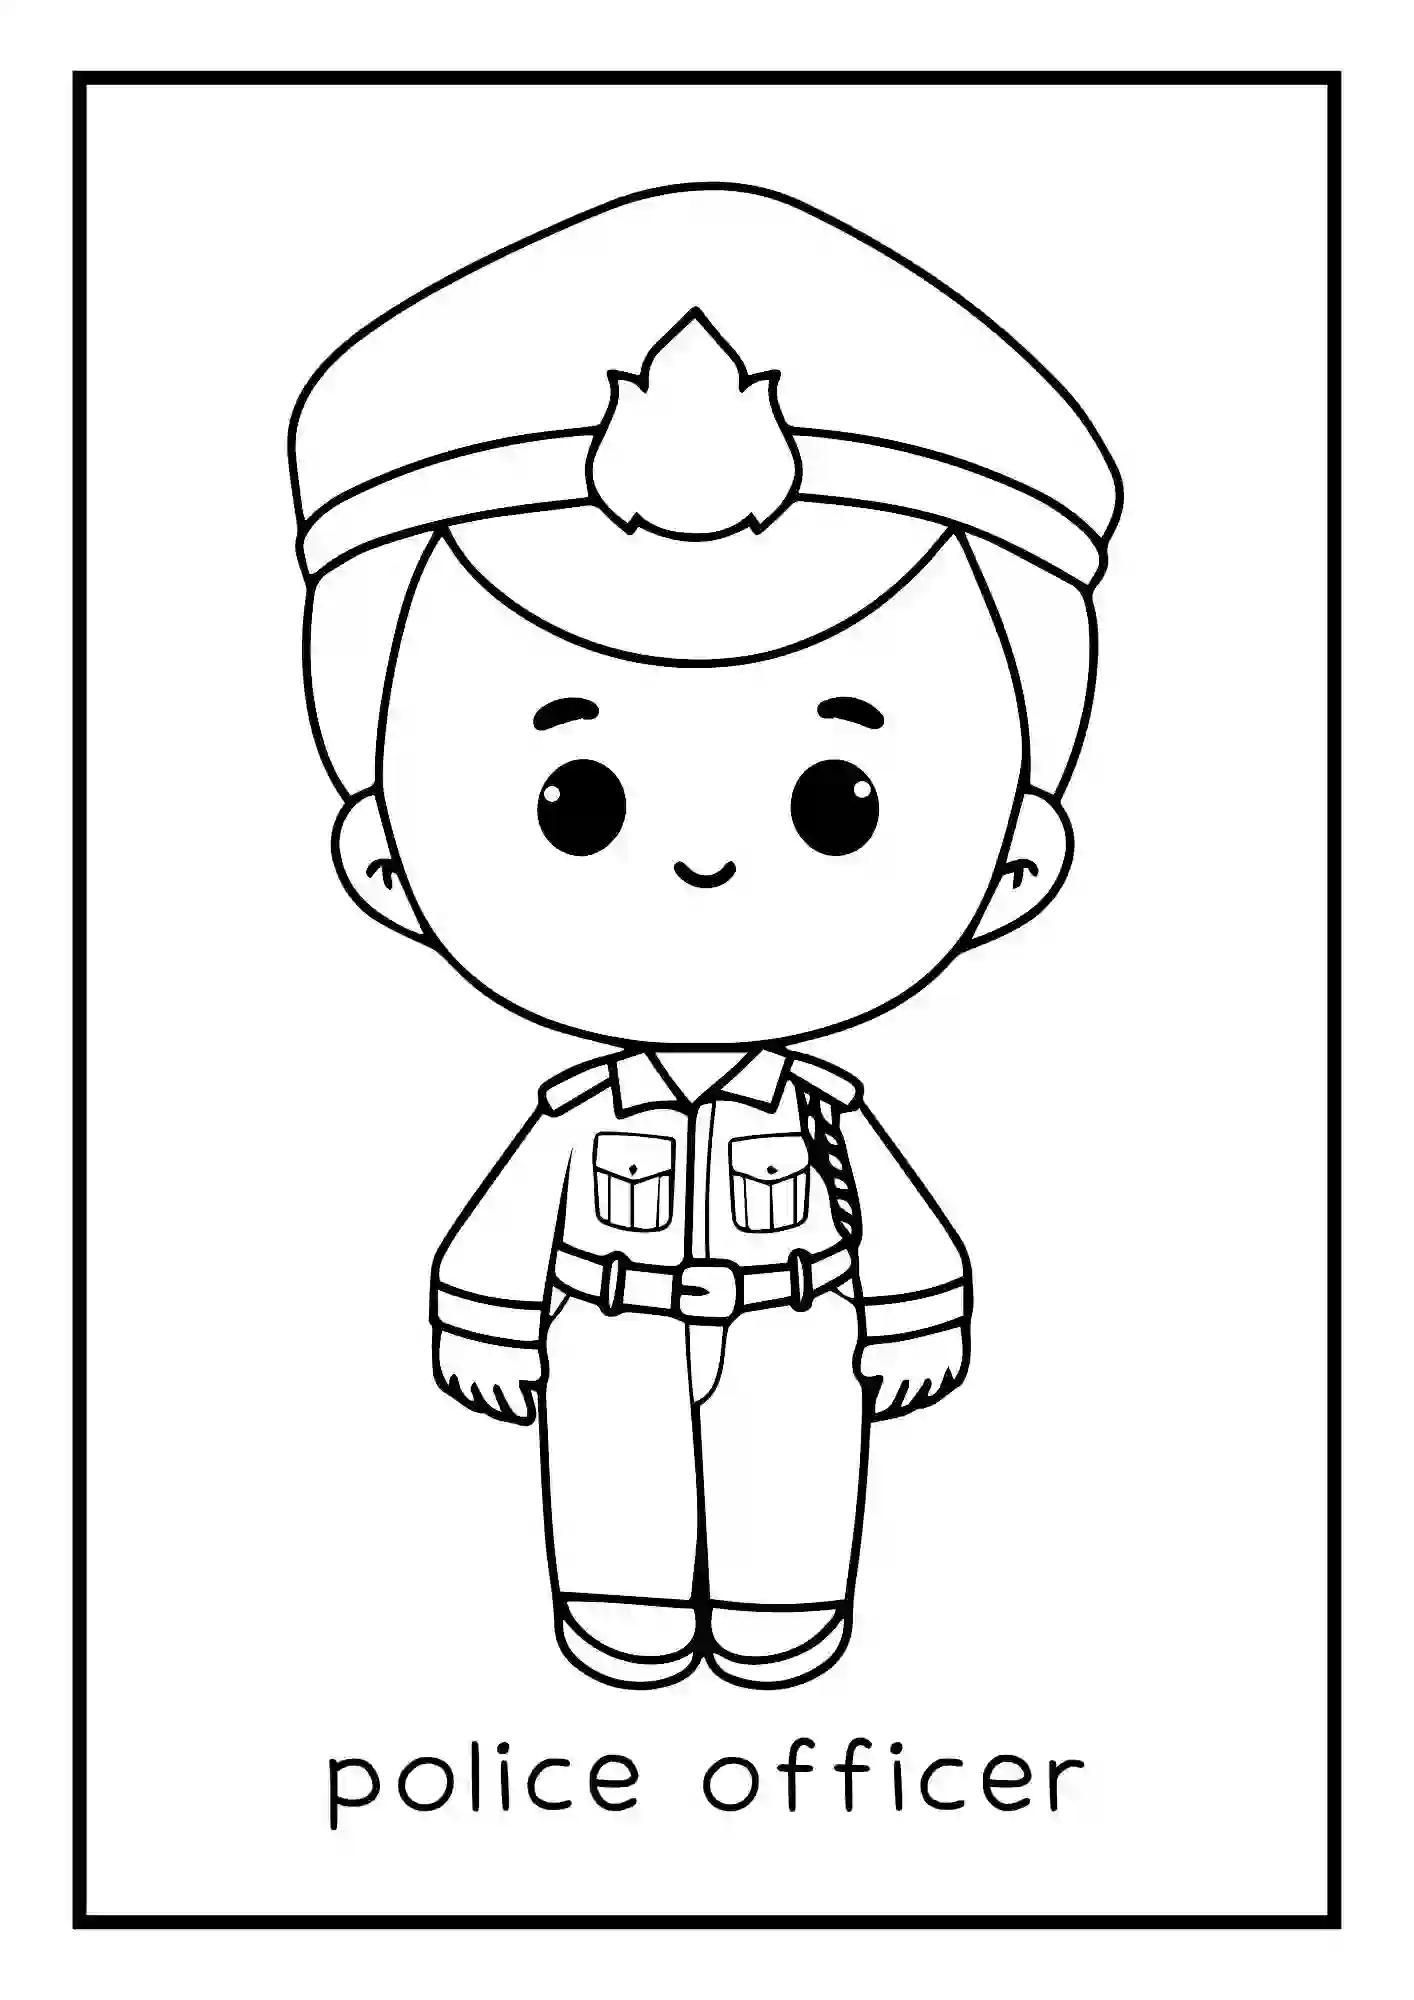 Different Professions, occupations, carriers, jobs, Coloring Worksheets (police officer)